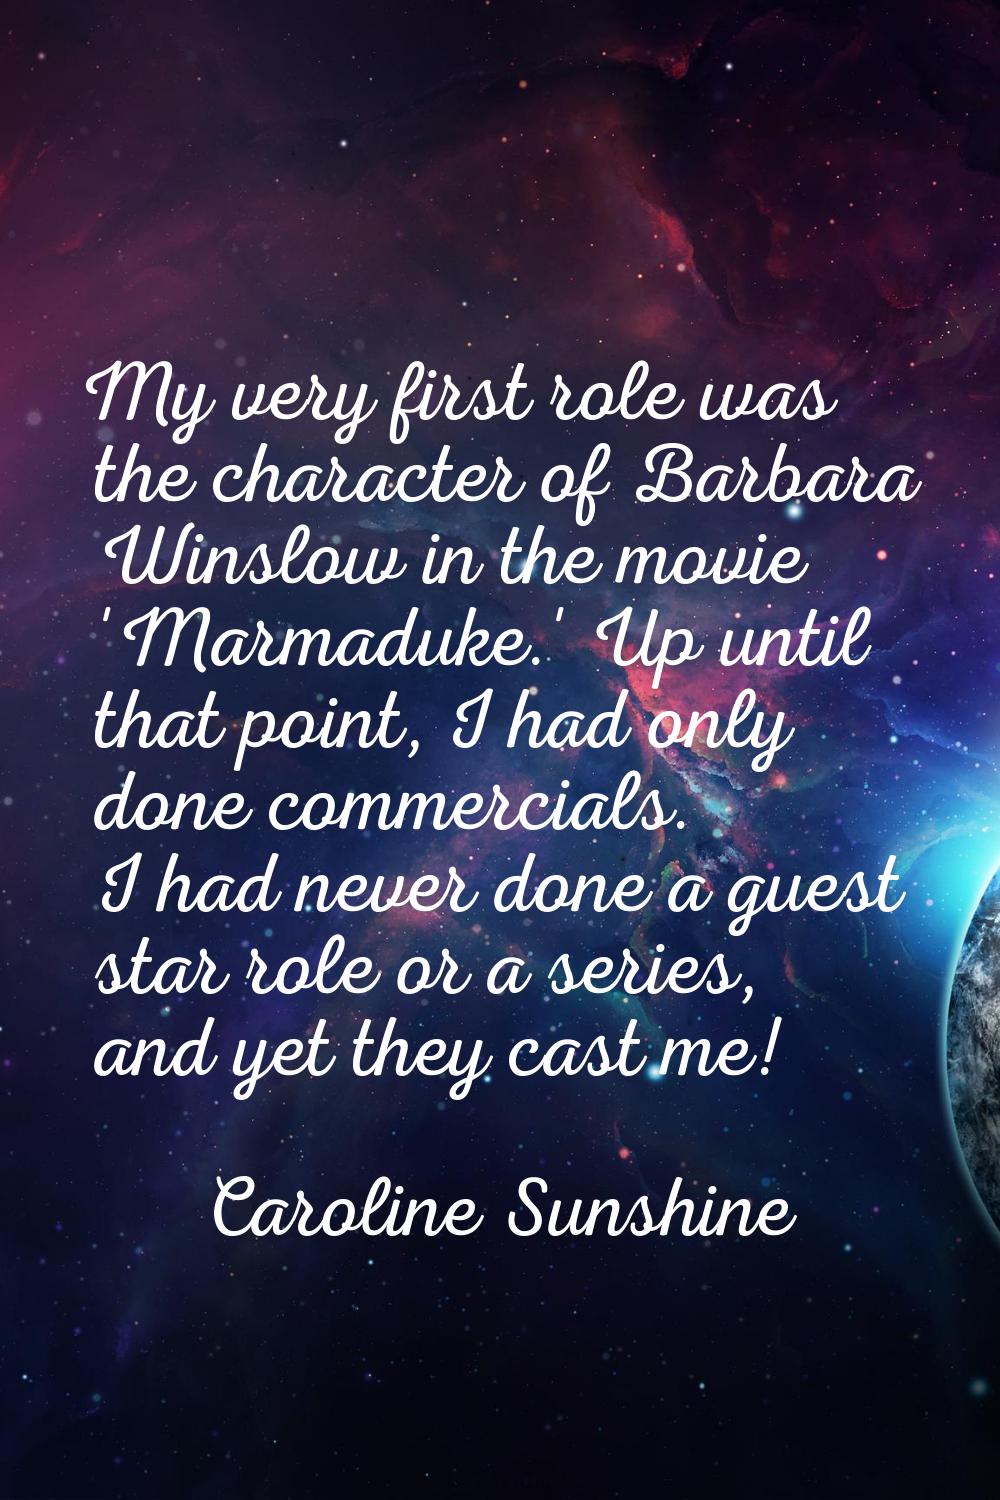 My very first role was the character of Barbara Winslow in the movie 'Marmaduke.' Up until that poi